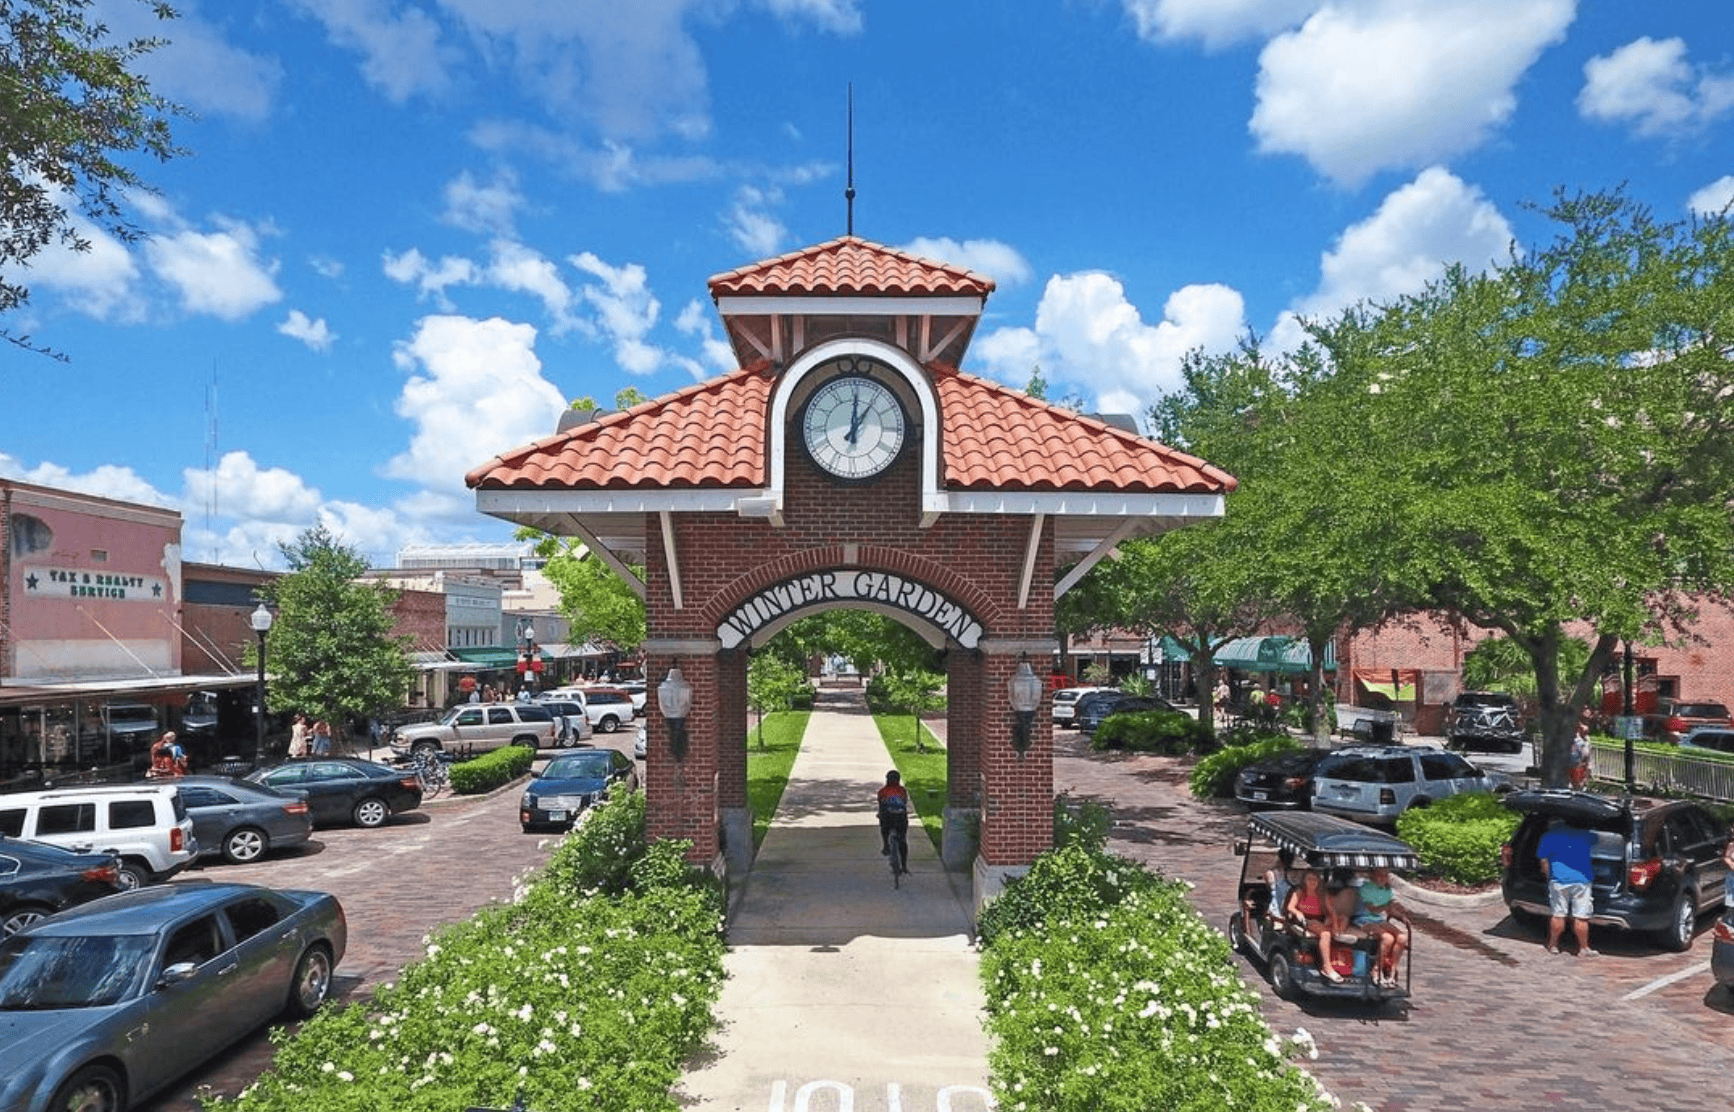 Date night ideas: image of downtown entrance with bike trails and brick lined streets in downtown Winter Garden